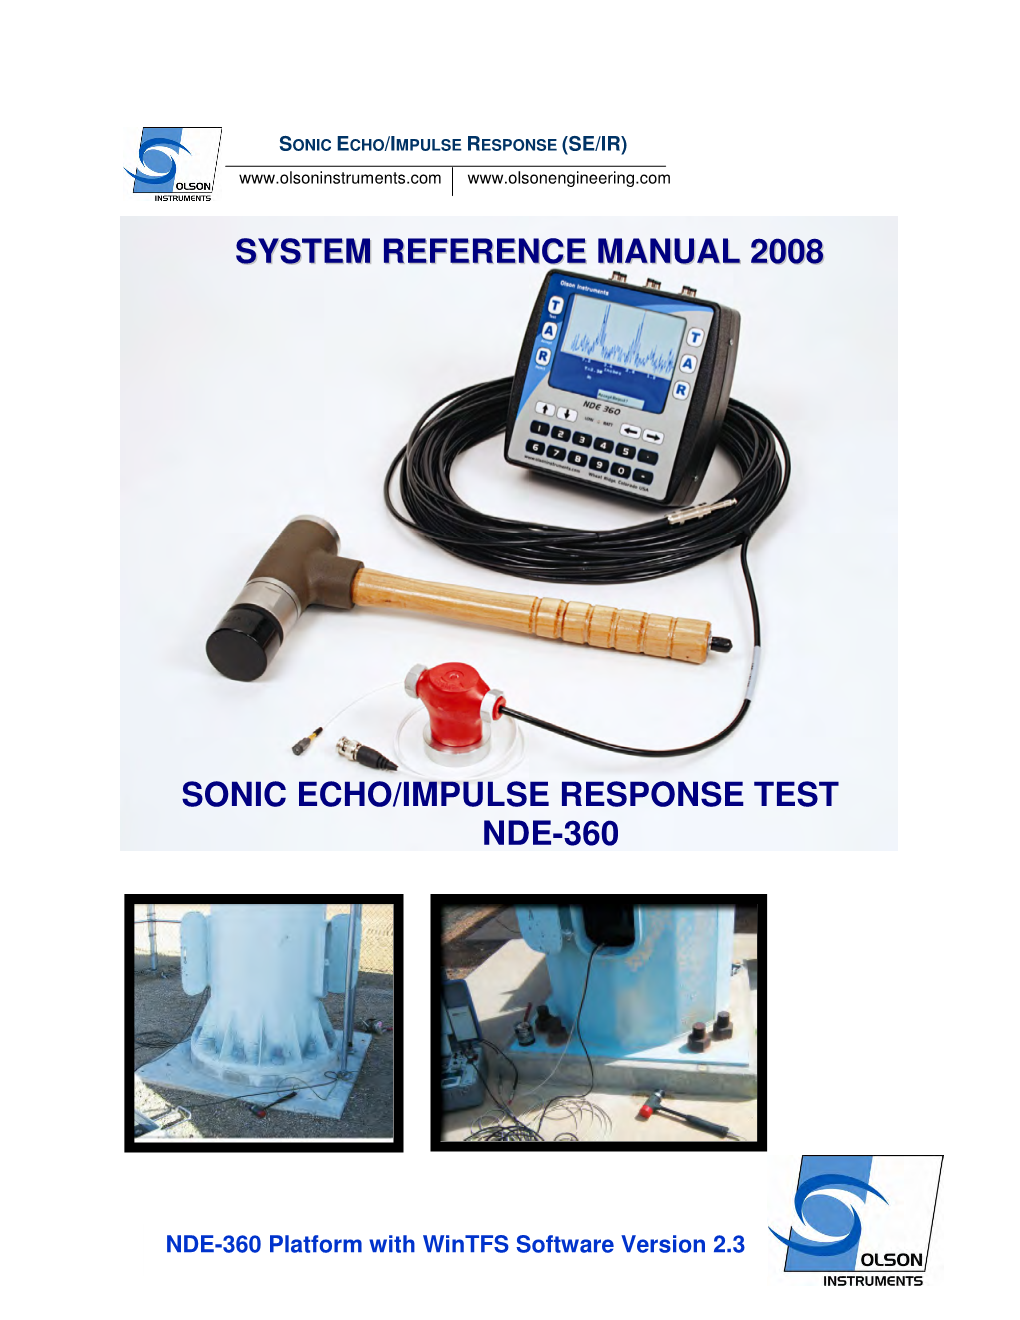 System Reference Manual 2008 Sonic Echo/Impulse